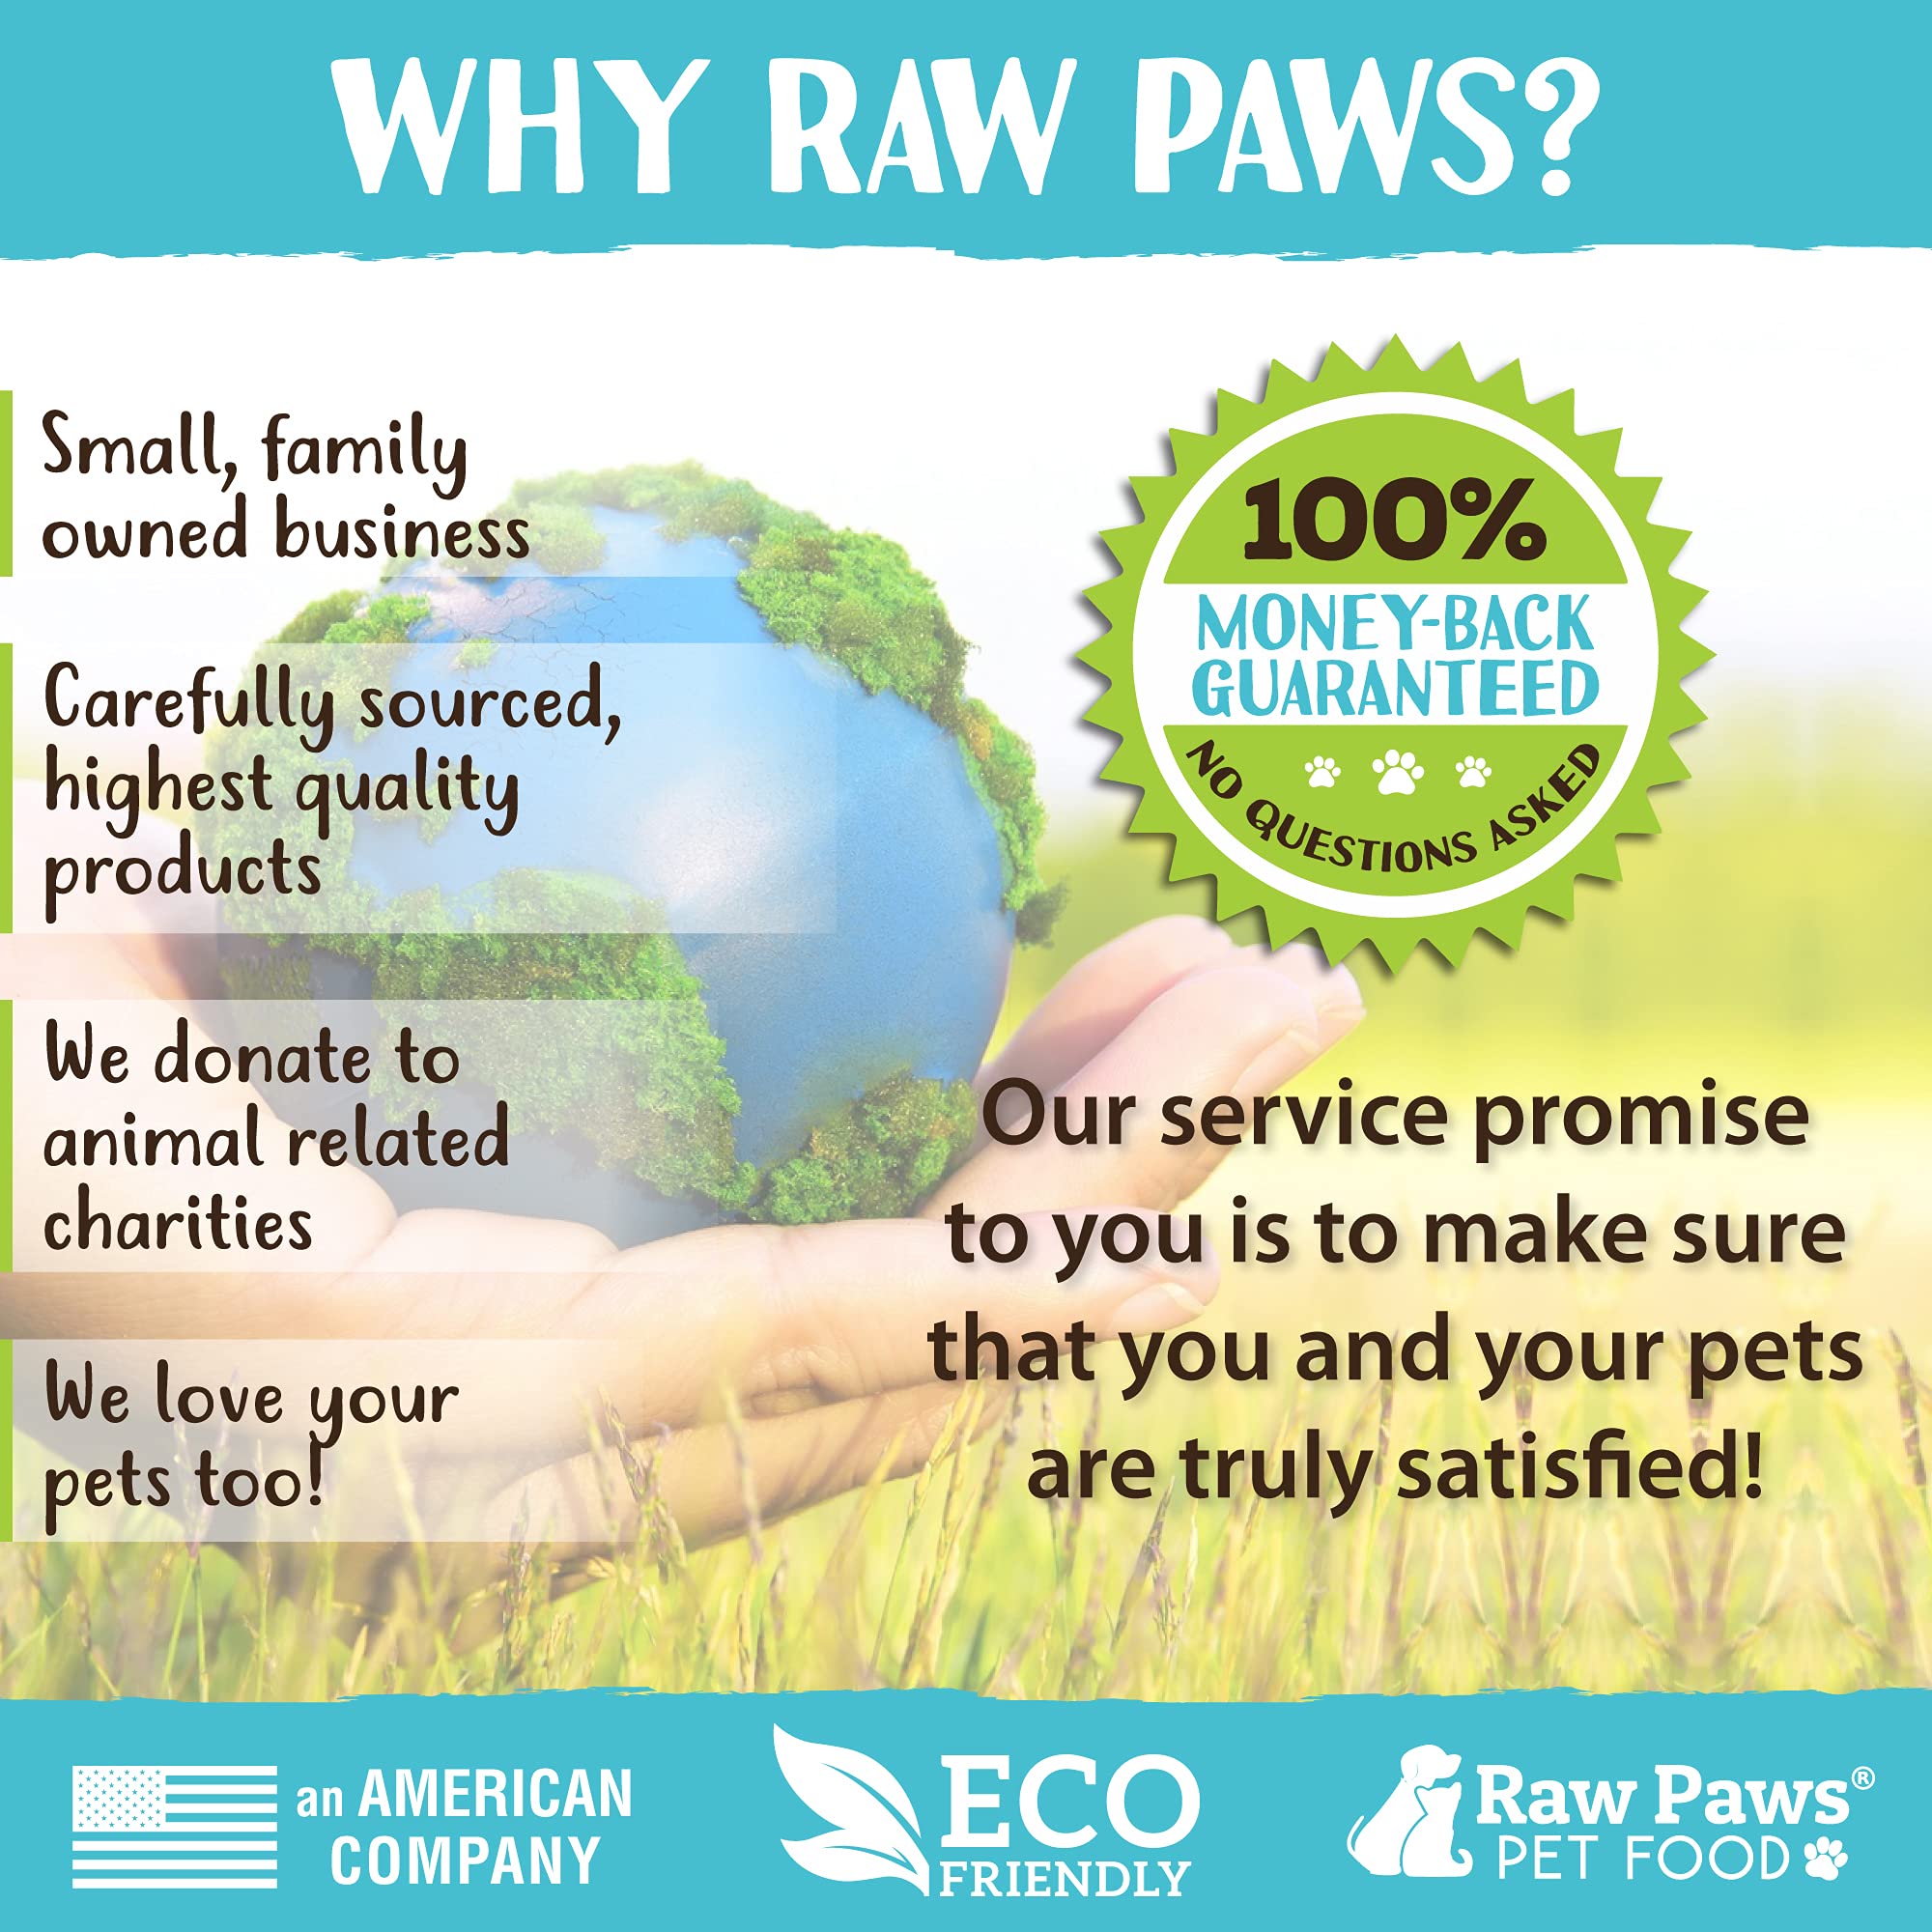 Raw Paws Silvervine Powder, 75 Grams - 2X More Attractive than Catnip for Cats, 100% Silver Vine Gall Fruit Powder, Matatabi Silvervine Cat Toy for Indoor Cats, Catnip Kitten Toys, Silvervine for Cats